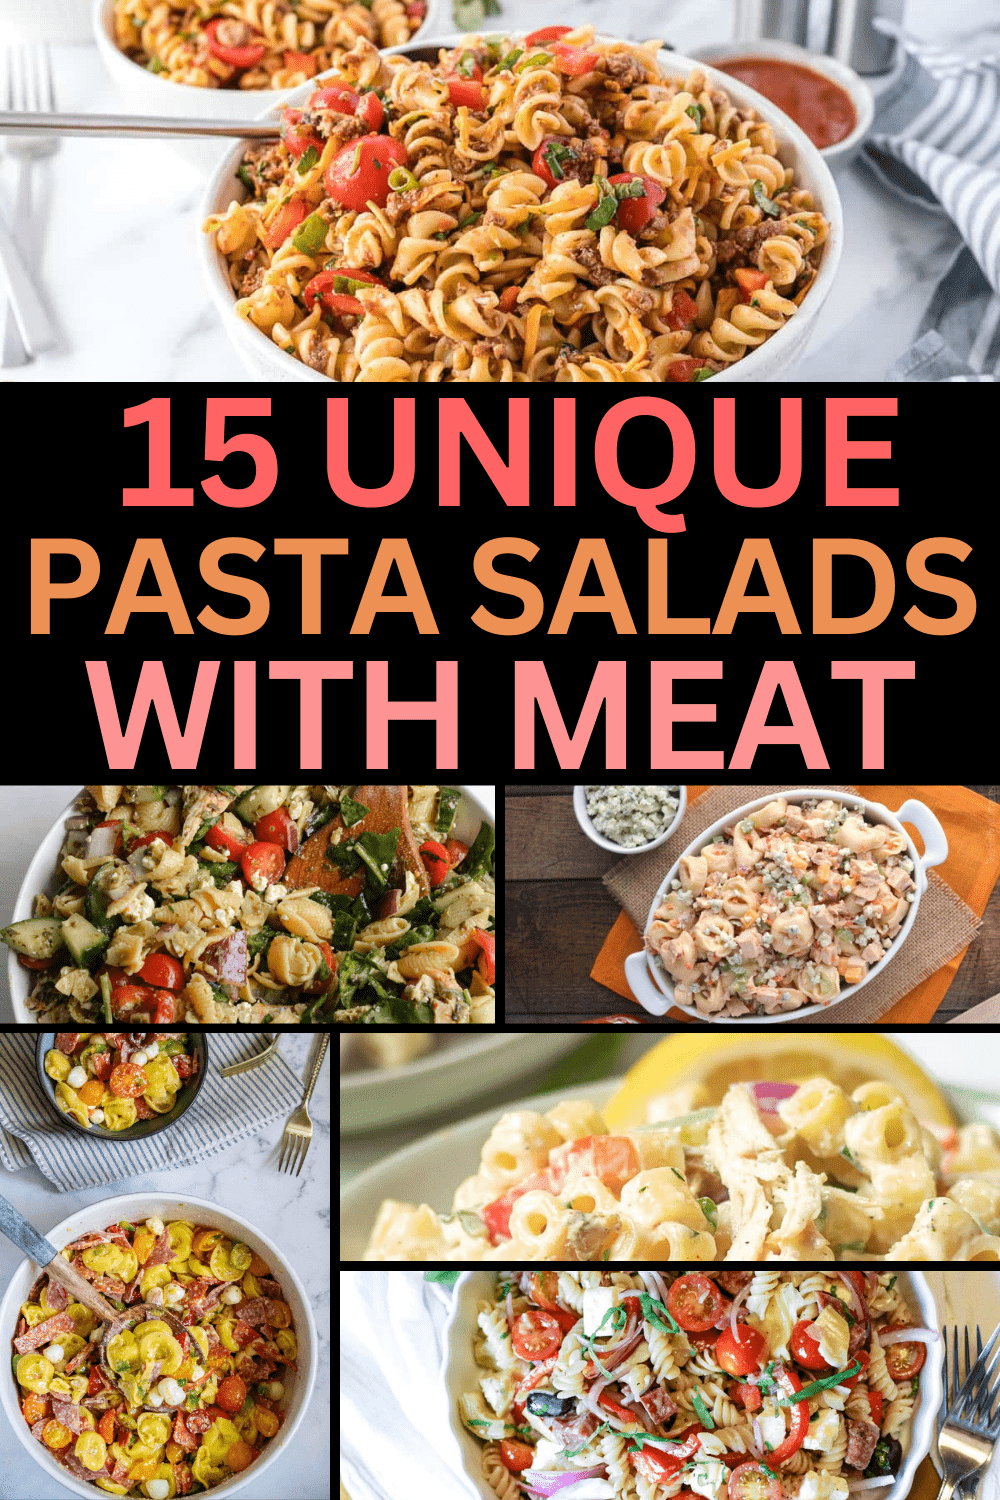 Easy summer pasta salad recipes with chicken, bacon, pepperoni, and ham! From Italian, Greek, Taco and more, these unique pasta salads are sure to be a hit. On hot summer days, nothing beats cold pasta salad, and these recipes with meat are meals on their own! Pasta salad with chicken recipes, greek tortellini pasta salad with chicken, easy pasta salad recipes with meat, pasta salad recipes with pepperoni, pasta salad recipes with ham and turkey, cold pasta salad recipes with bacon and broccoli.